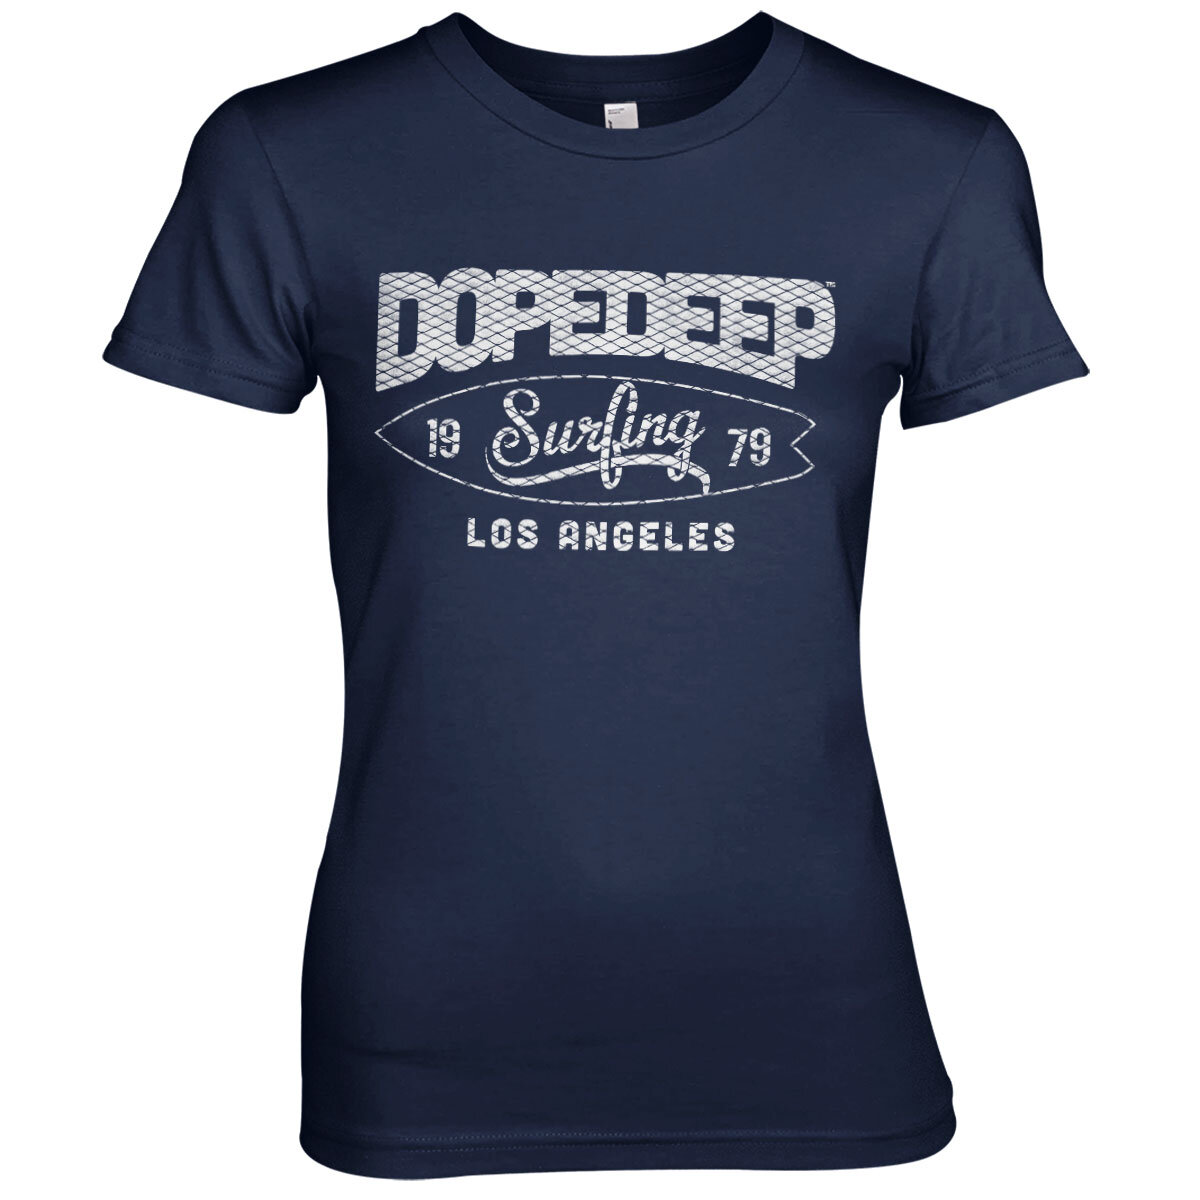 D&D Los Angeles Surfing Girly Tee